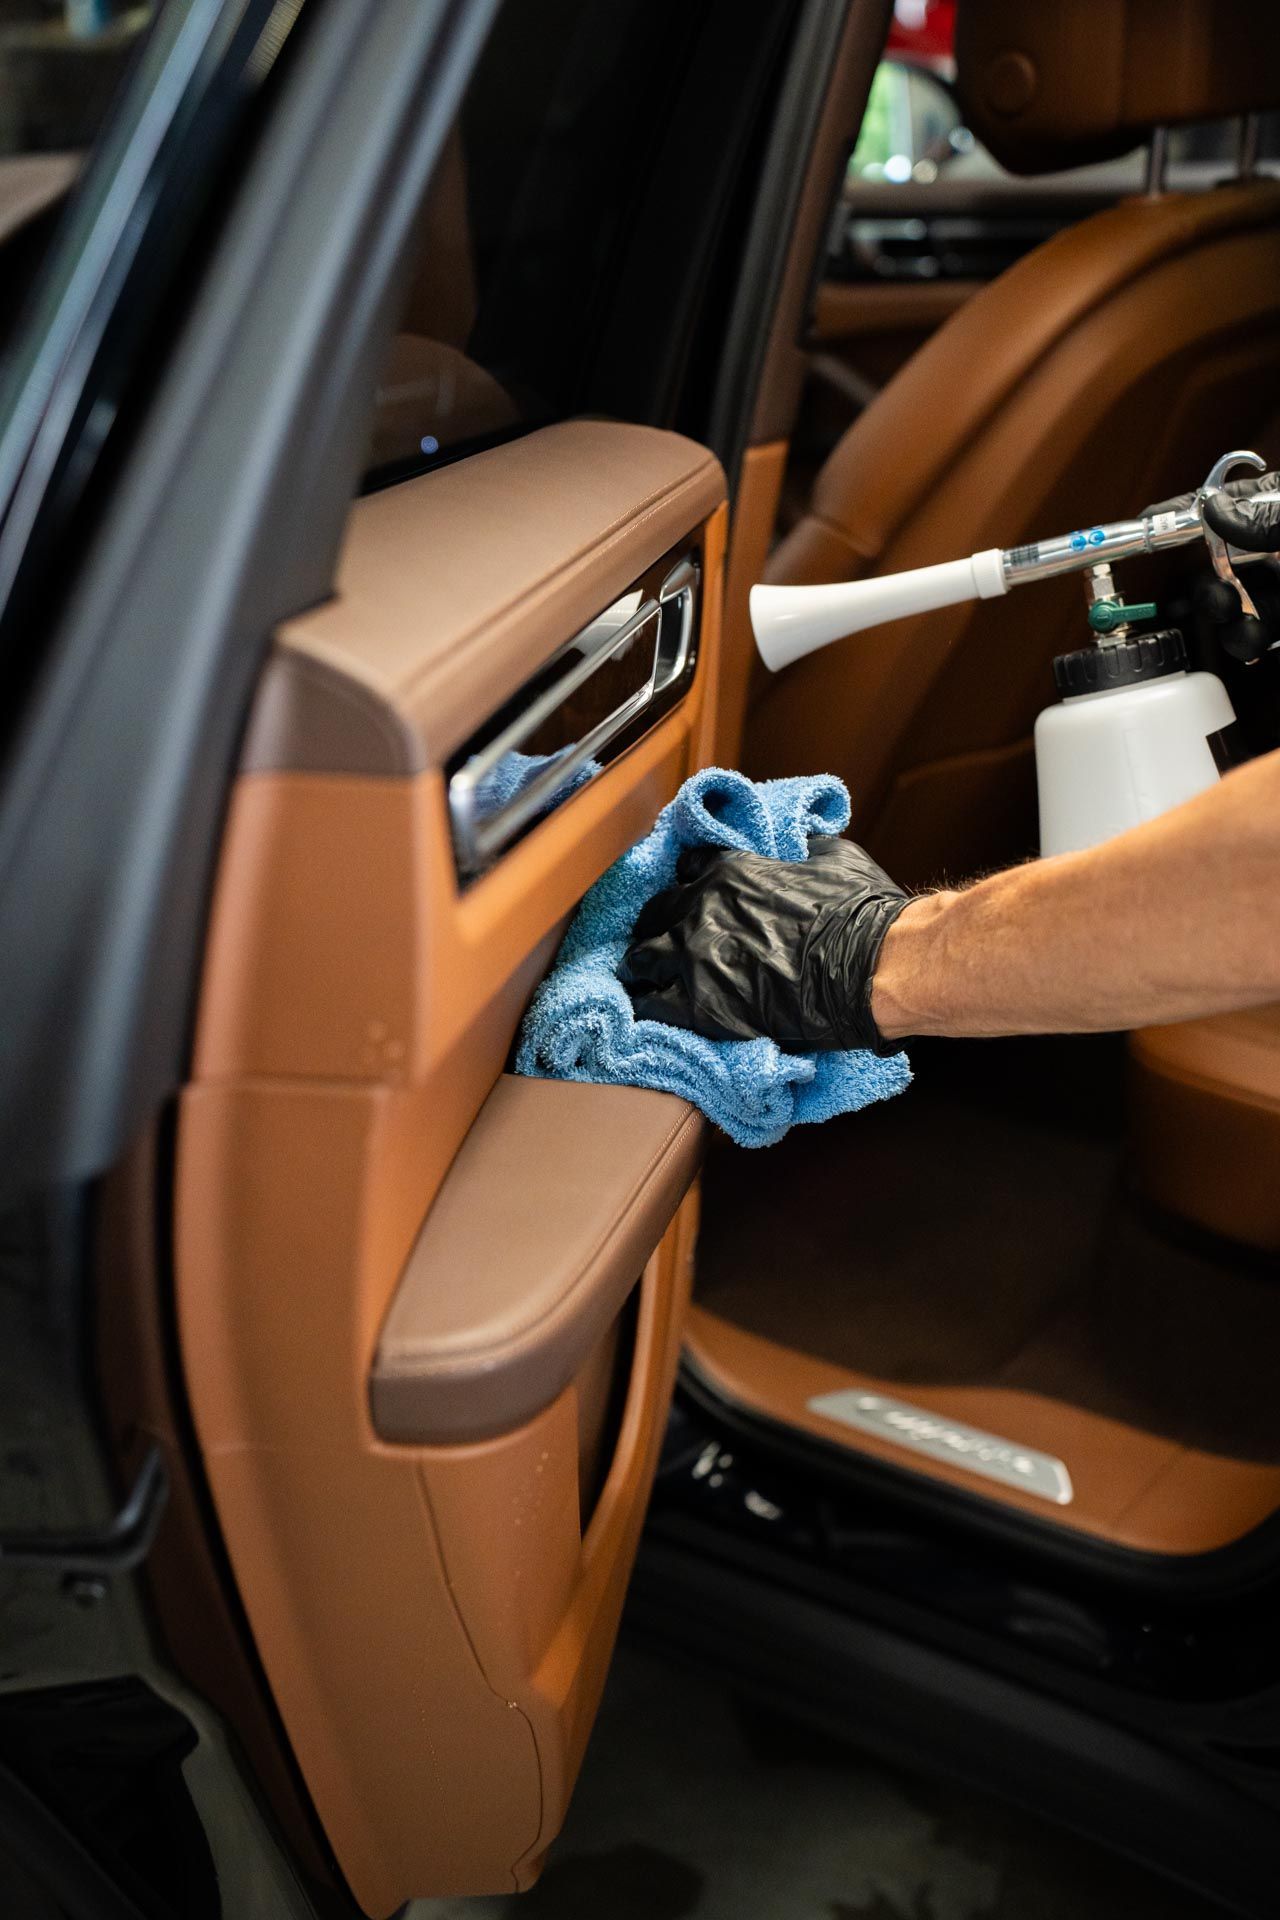 A person is cleaning the interior of a car with a spray bottle .